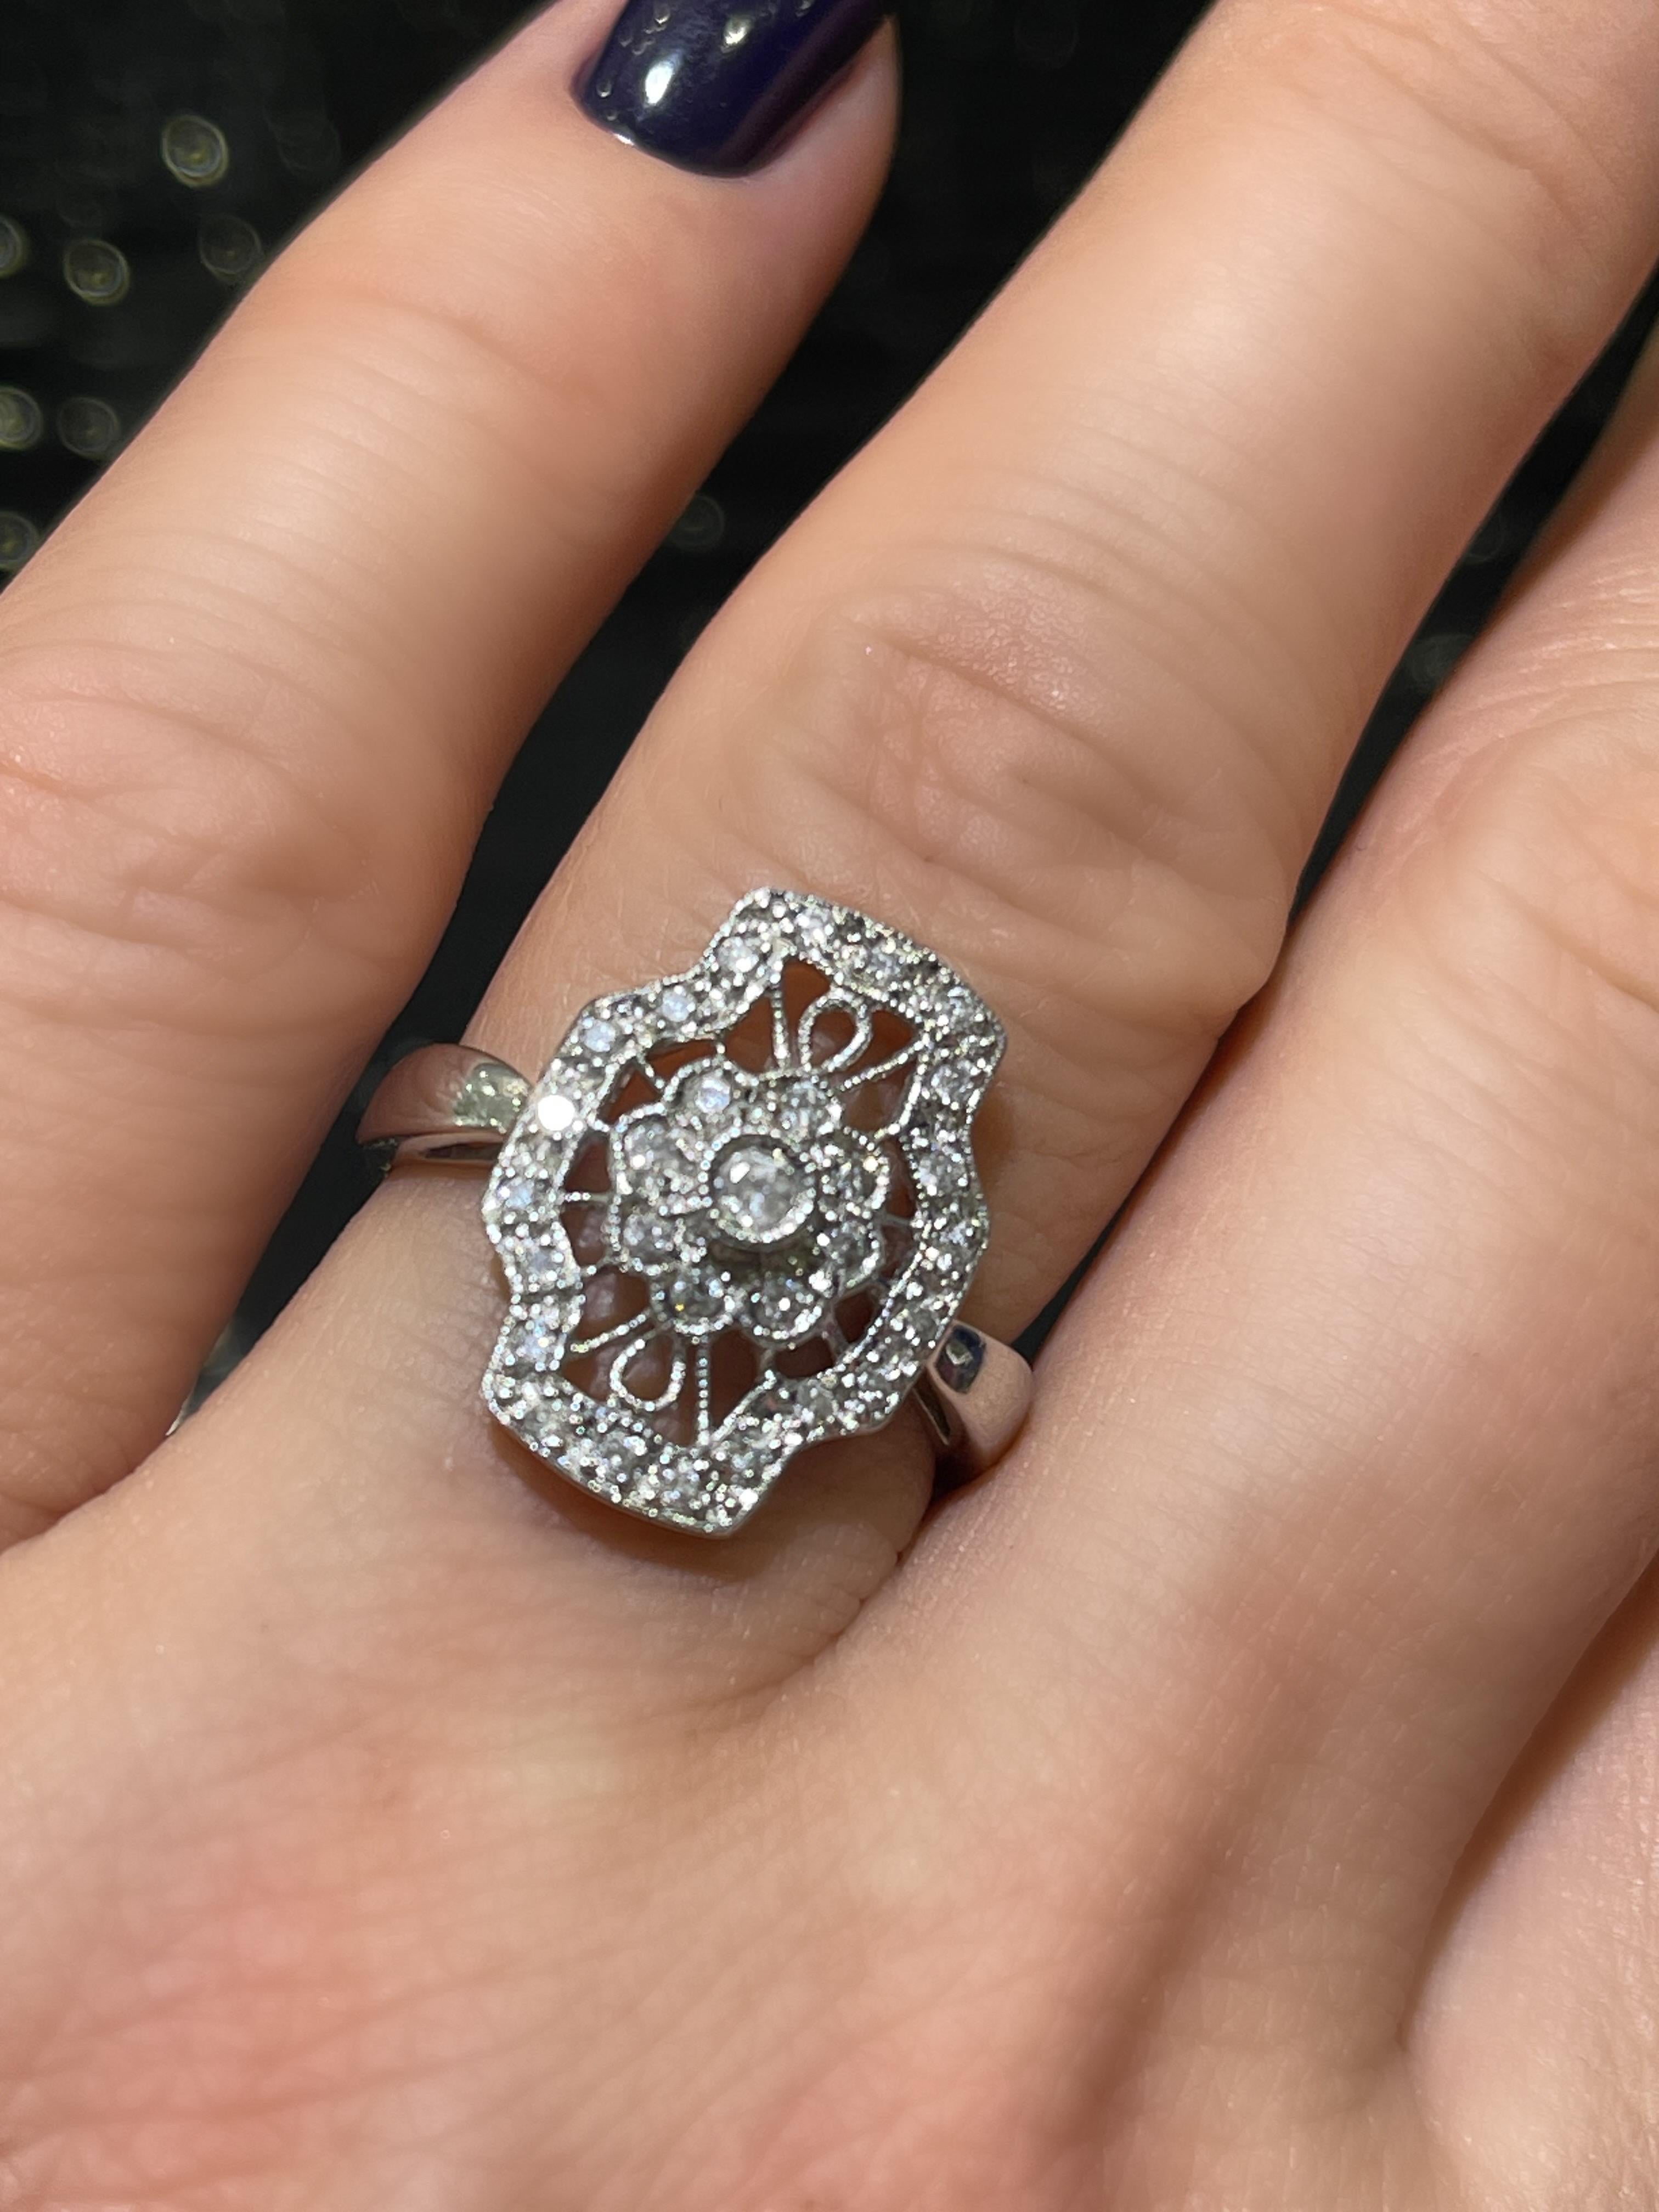 Vintage Diamond Ring In 14k White Gold  In Excellent Condition For Sale In Fort Lauderdale, FL